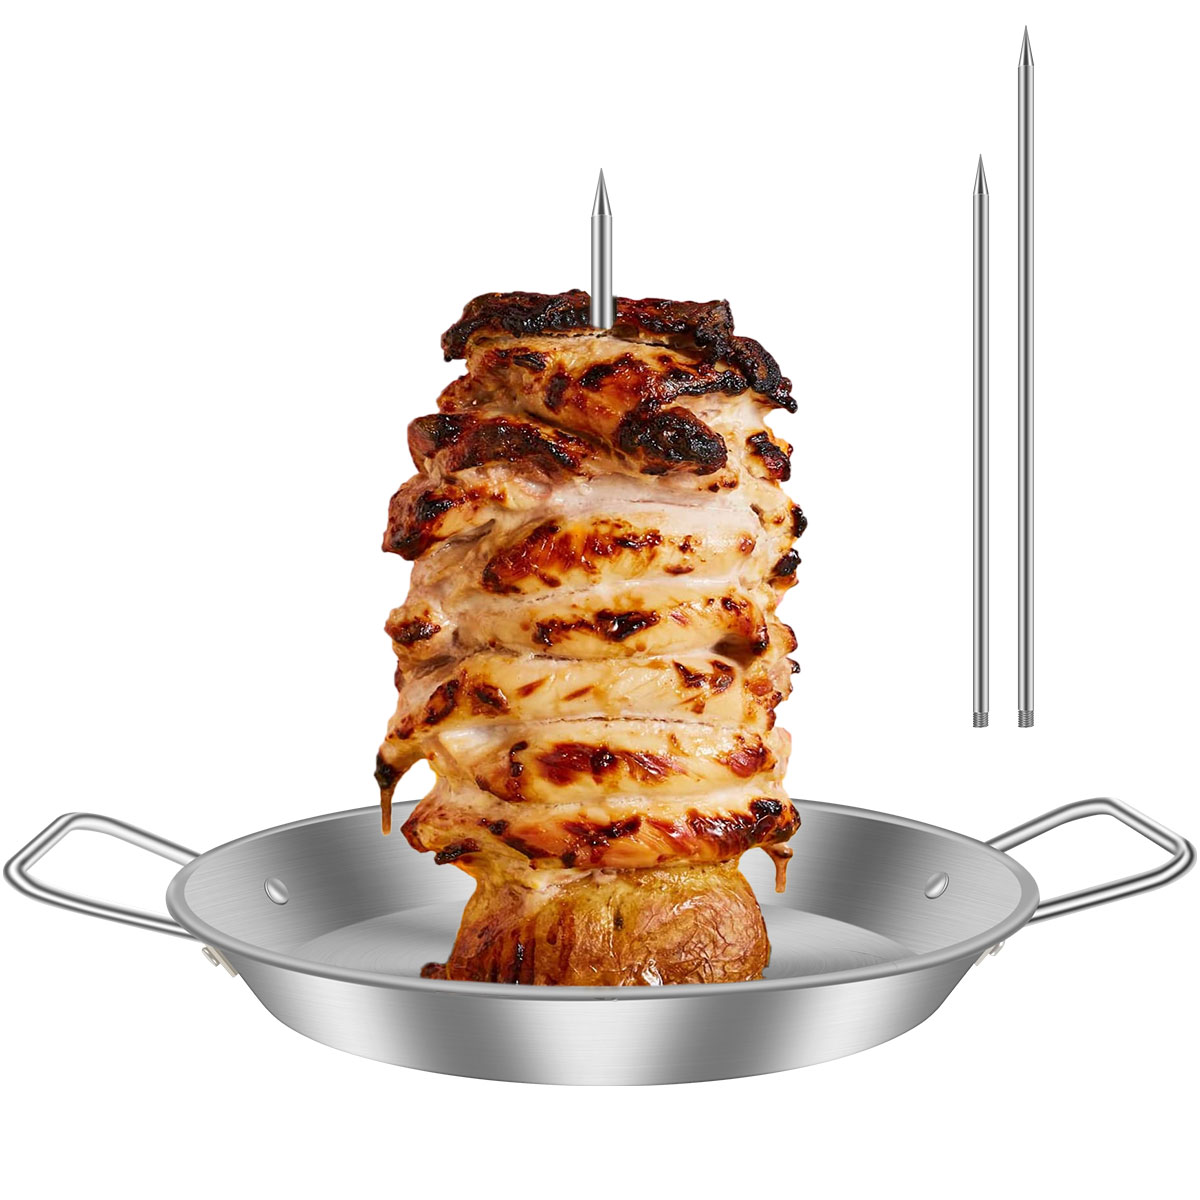 Gotydi Stainless Steel Vertical Skewer with 3 Replacement Spikes Vertical Skewer Grill Rack Stand with Handle for Whole Chicken Fish Sausage Steak - image 3 of 11